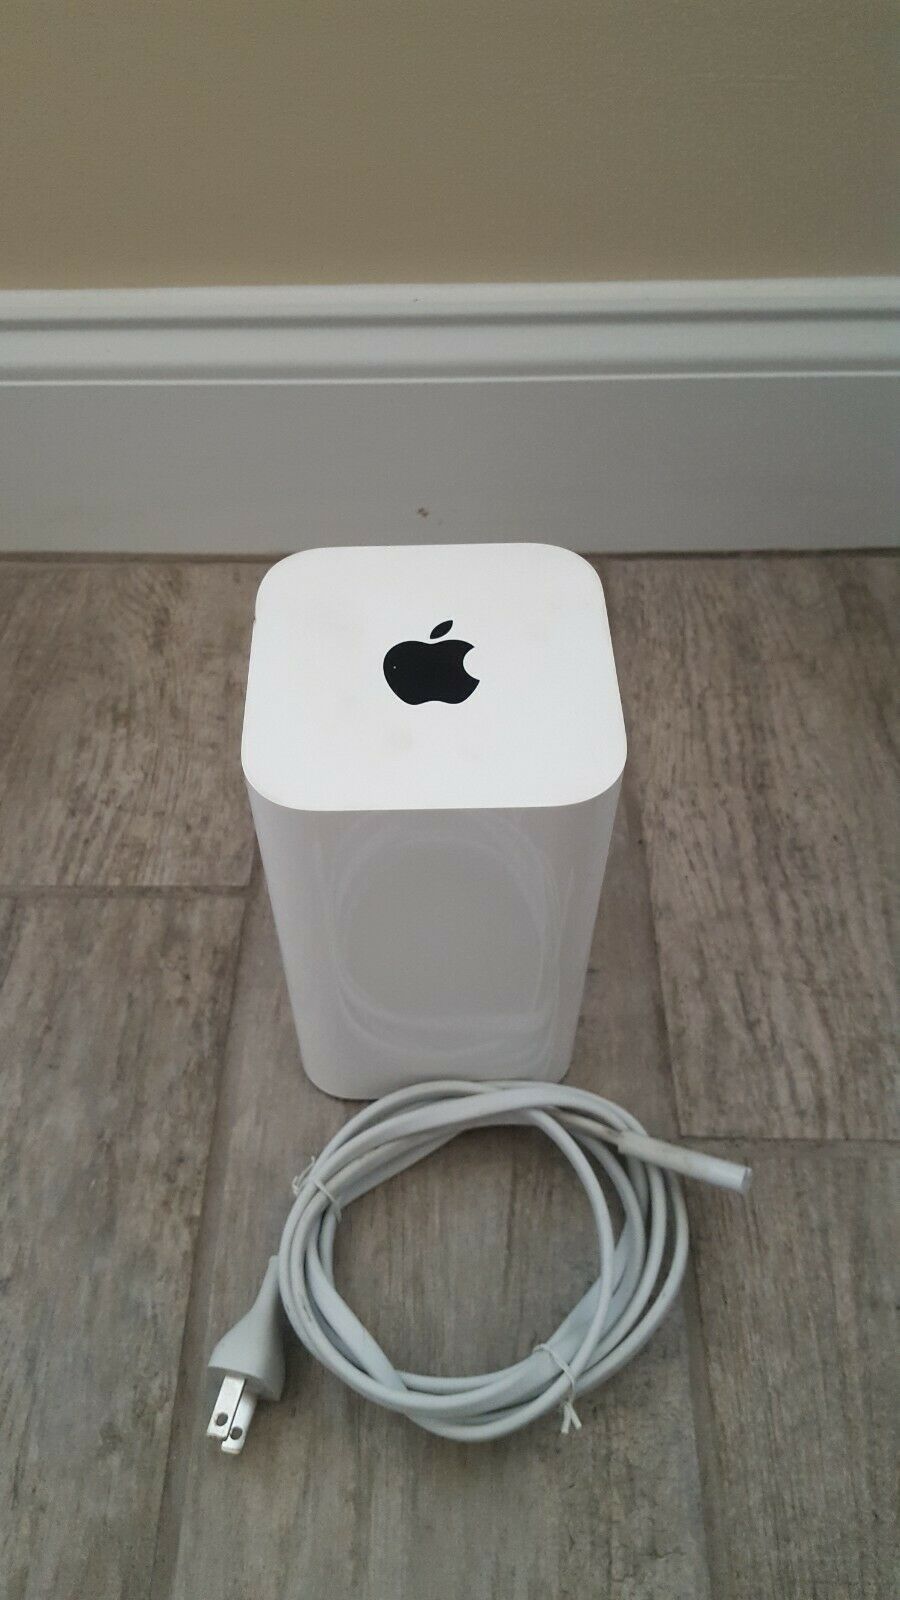 apple airport extreme base station me918ll a